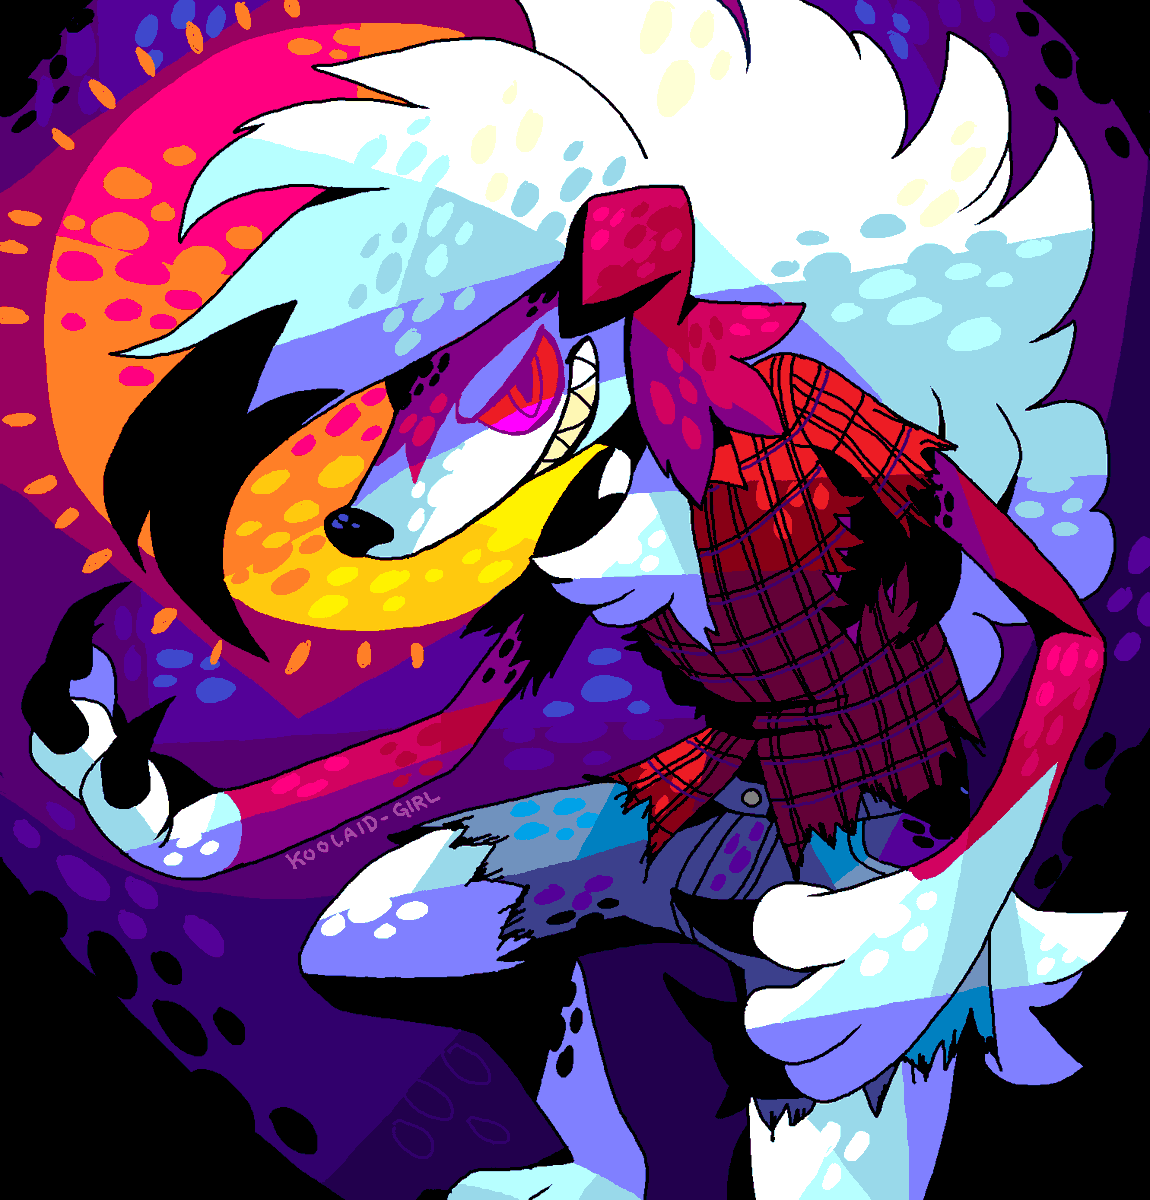 「Bringing back old spooky Pokemon art #ms」|🌸Ms Paint Queen💖💙💜のイラスト